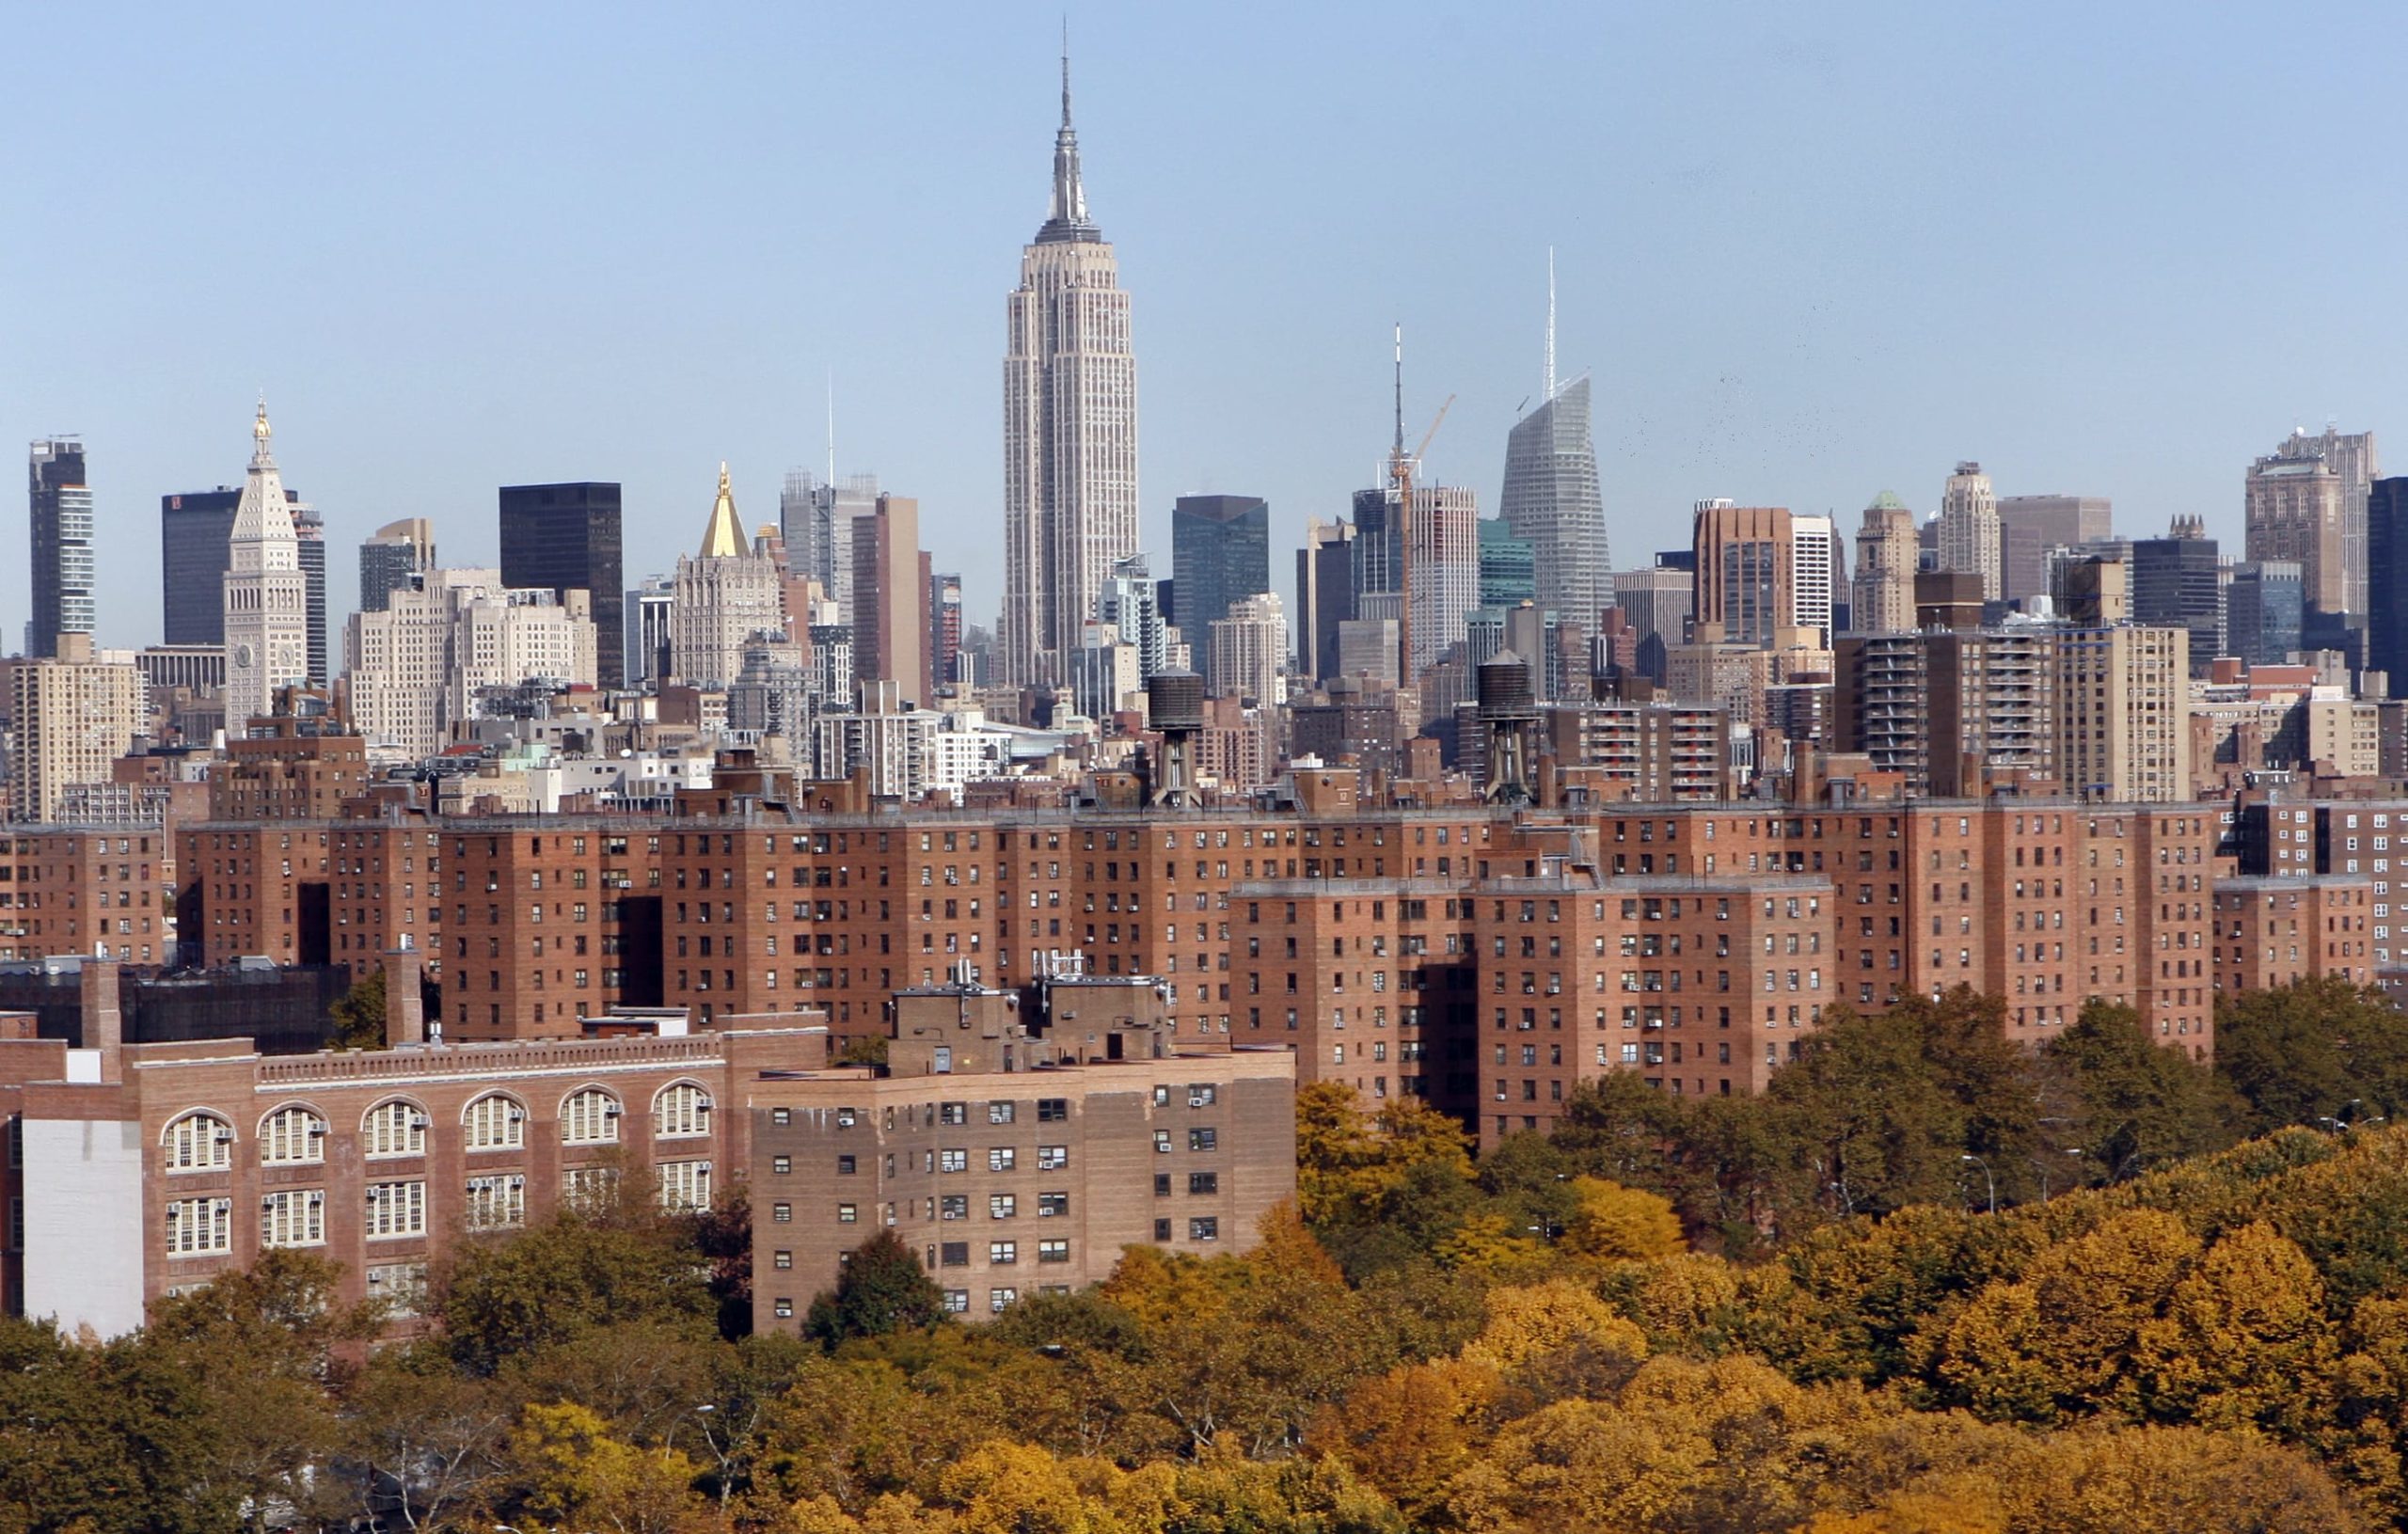 Manhattan residence contracts fall over 80% in Could, Florida surges